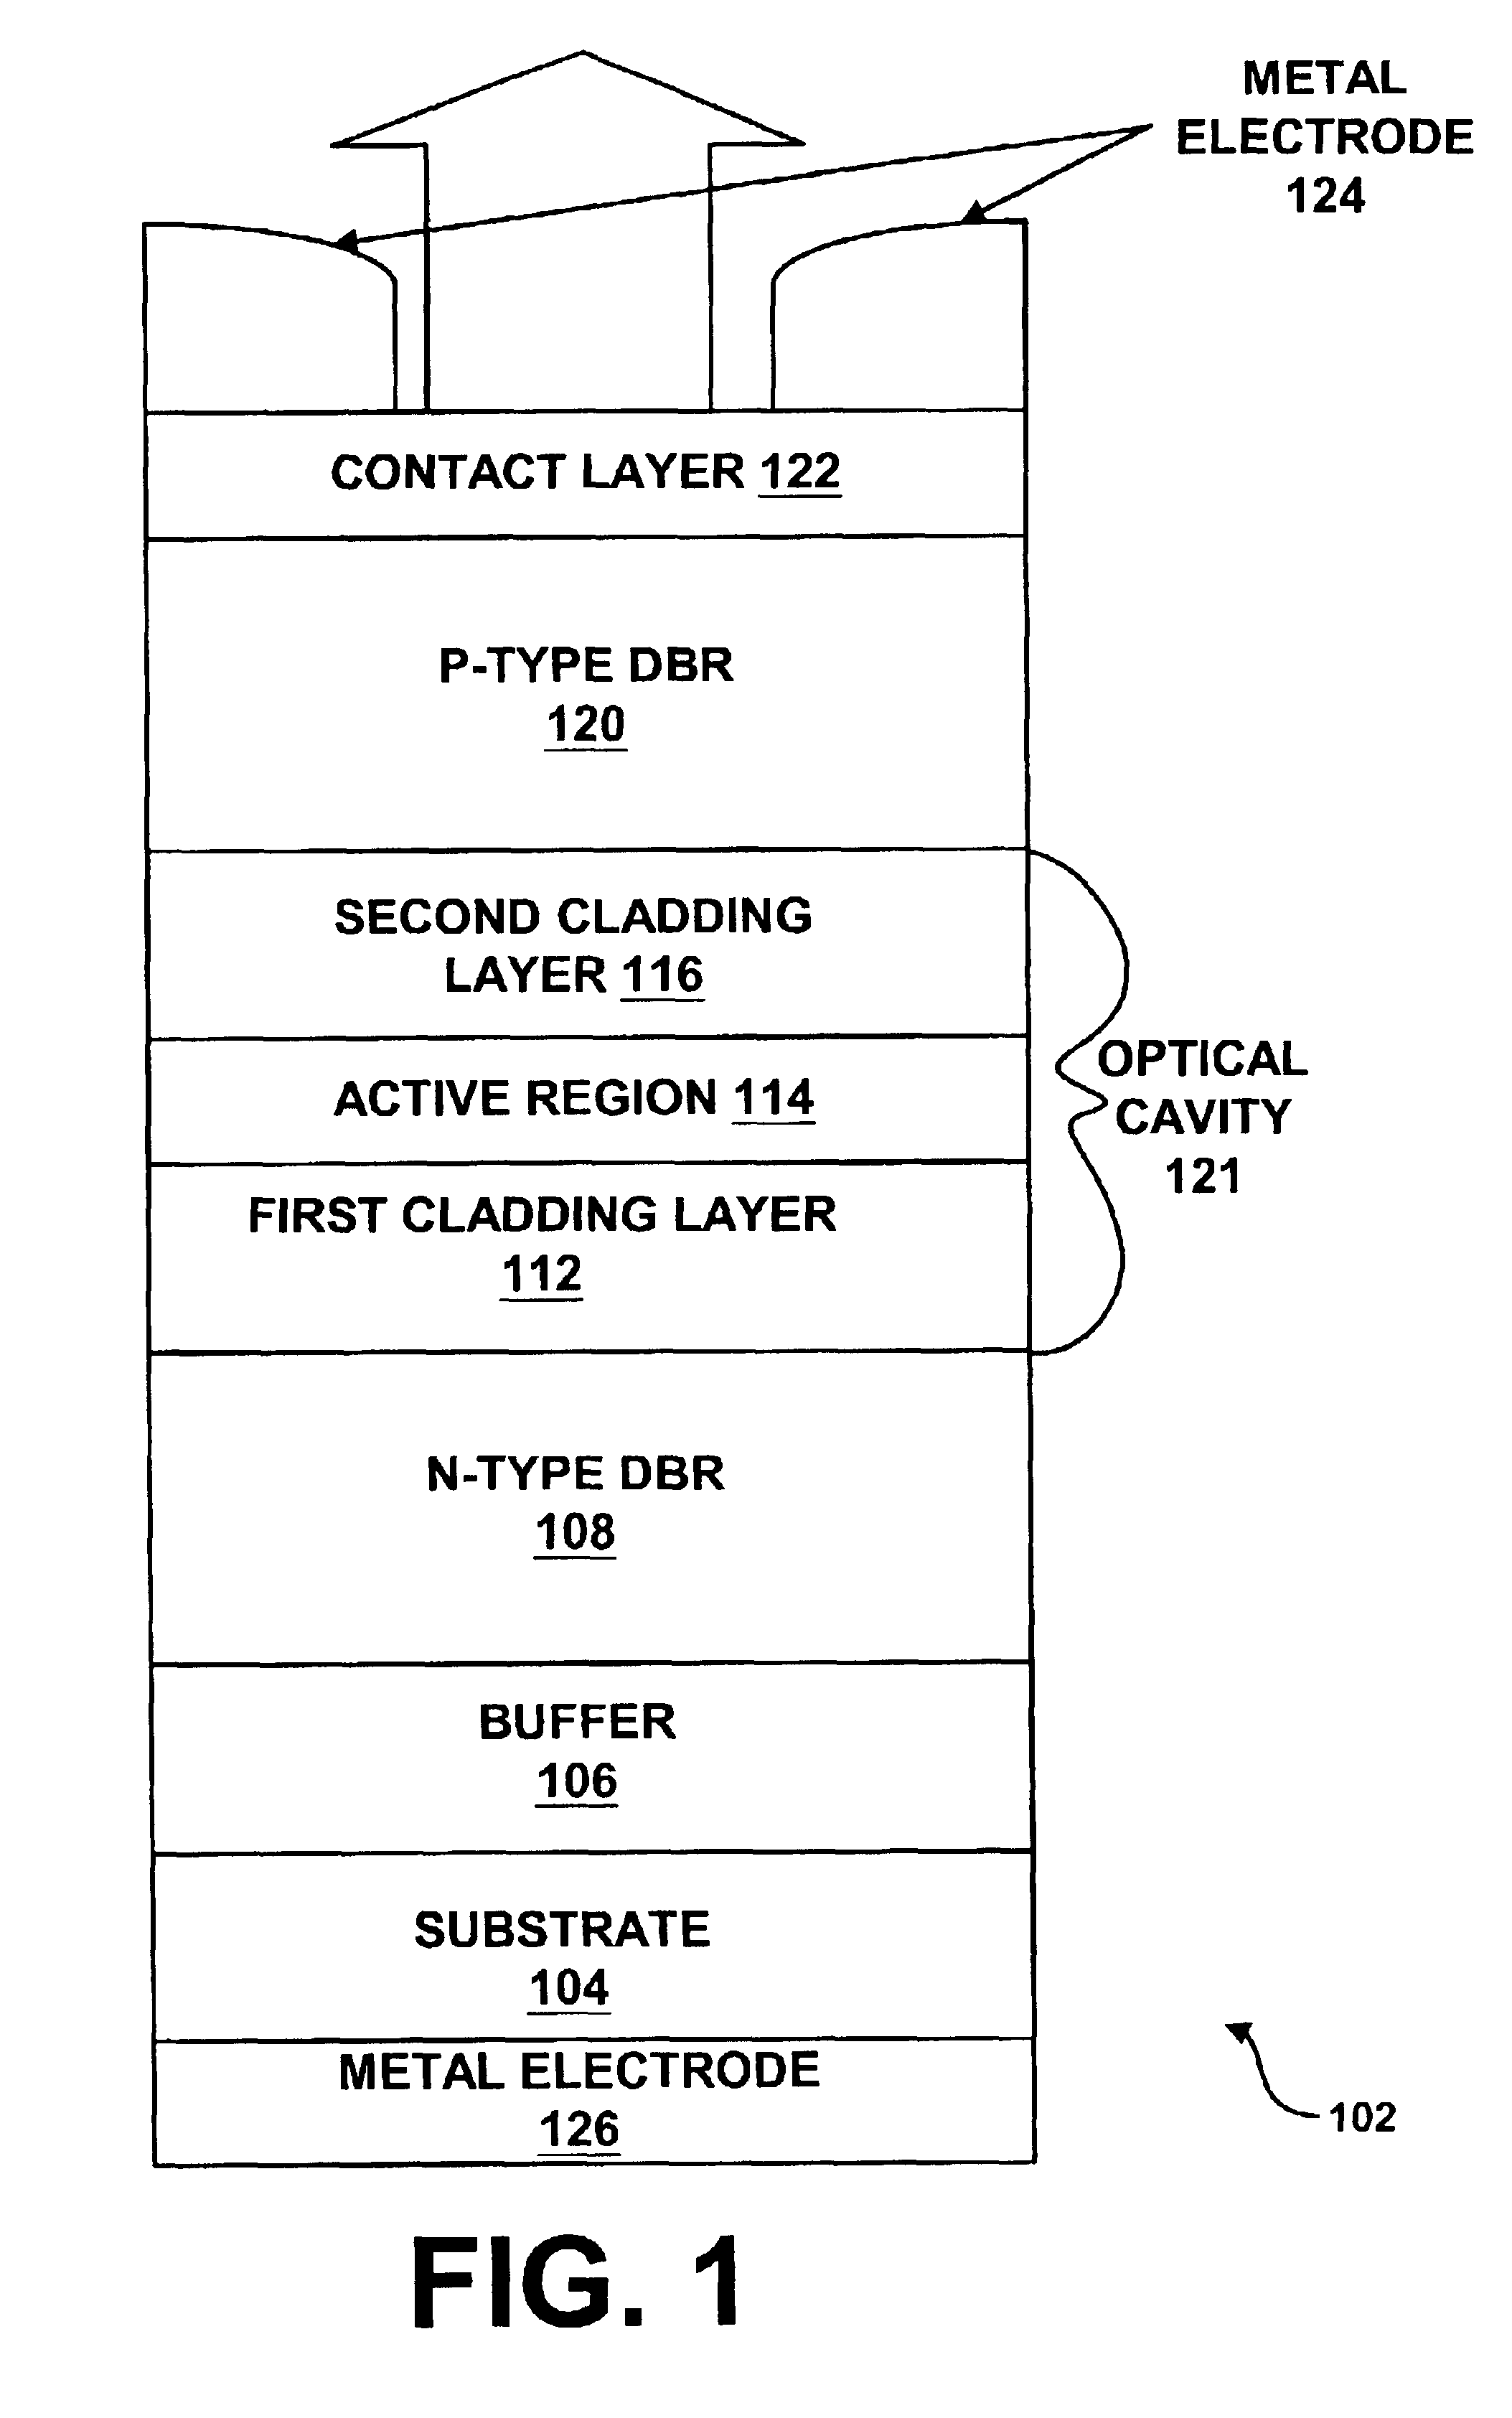 System and method for fabricating efficient semiconductor lasers via use of precursors having a direct bond between a group III atom and a nitrogen atom